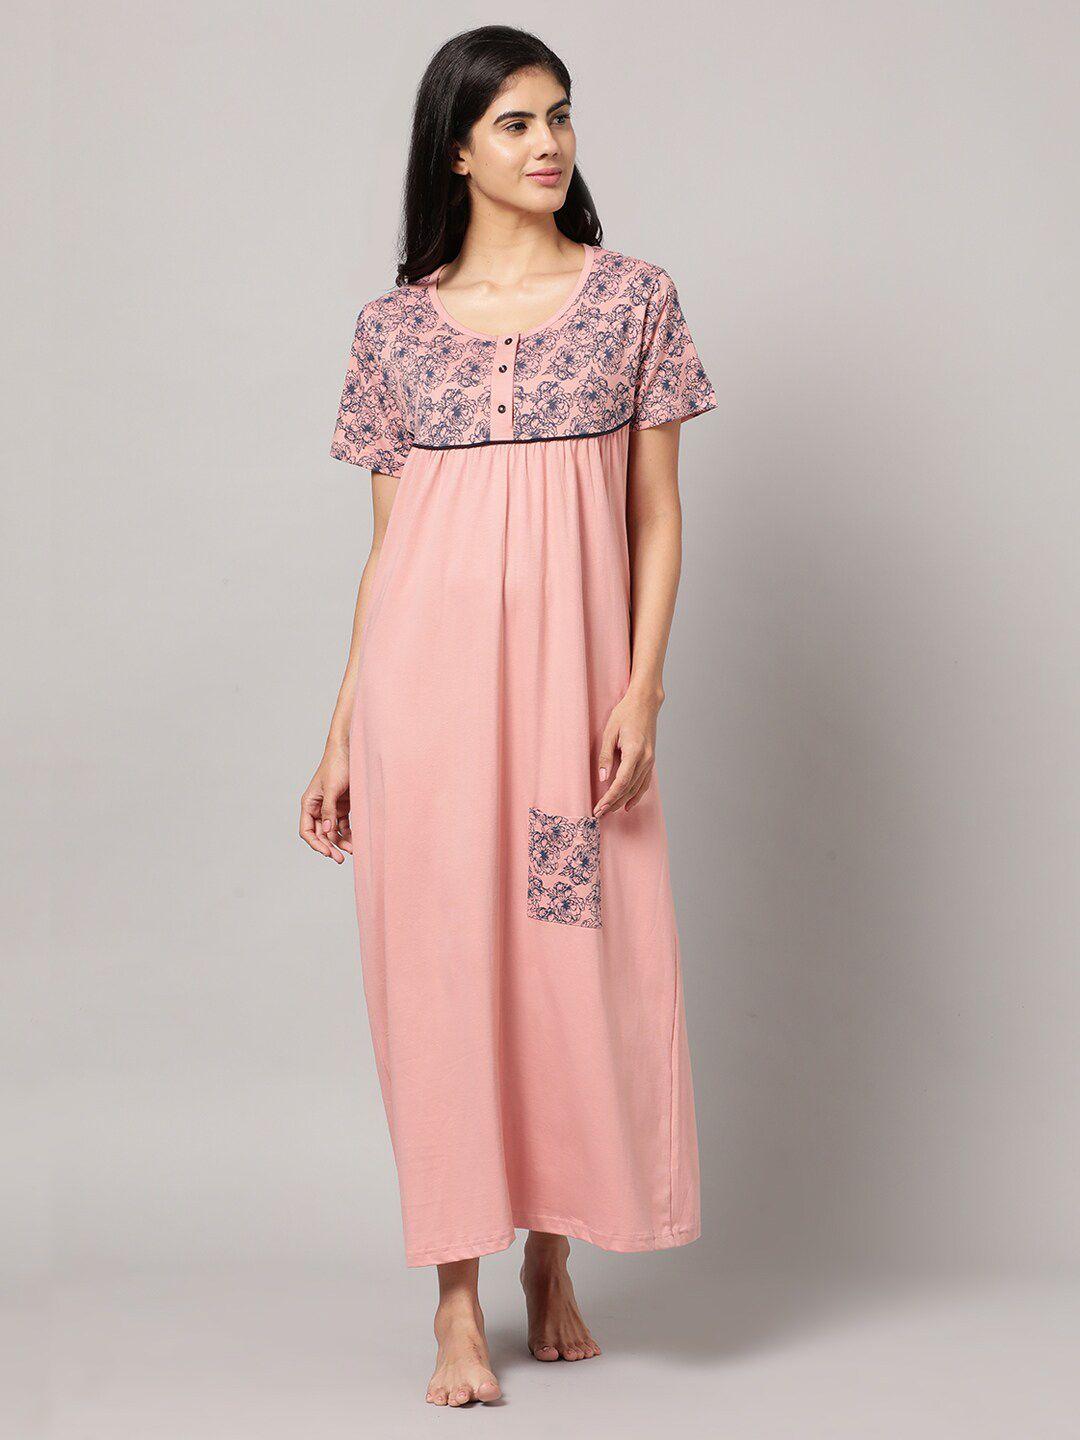 kryptic floral printed pure cotton maxi nightdress